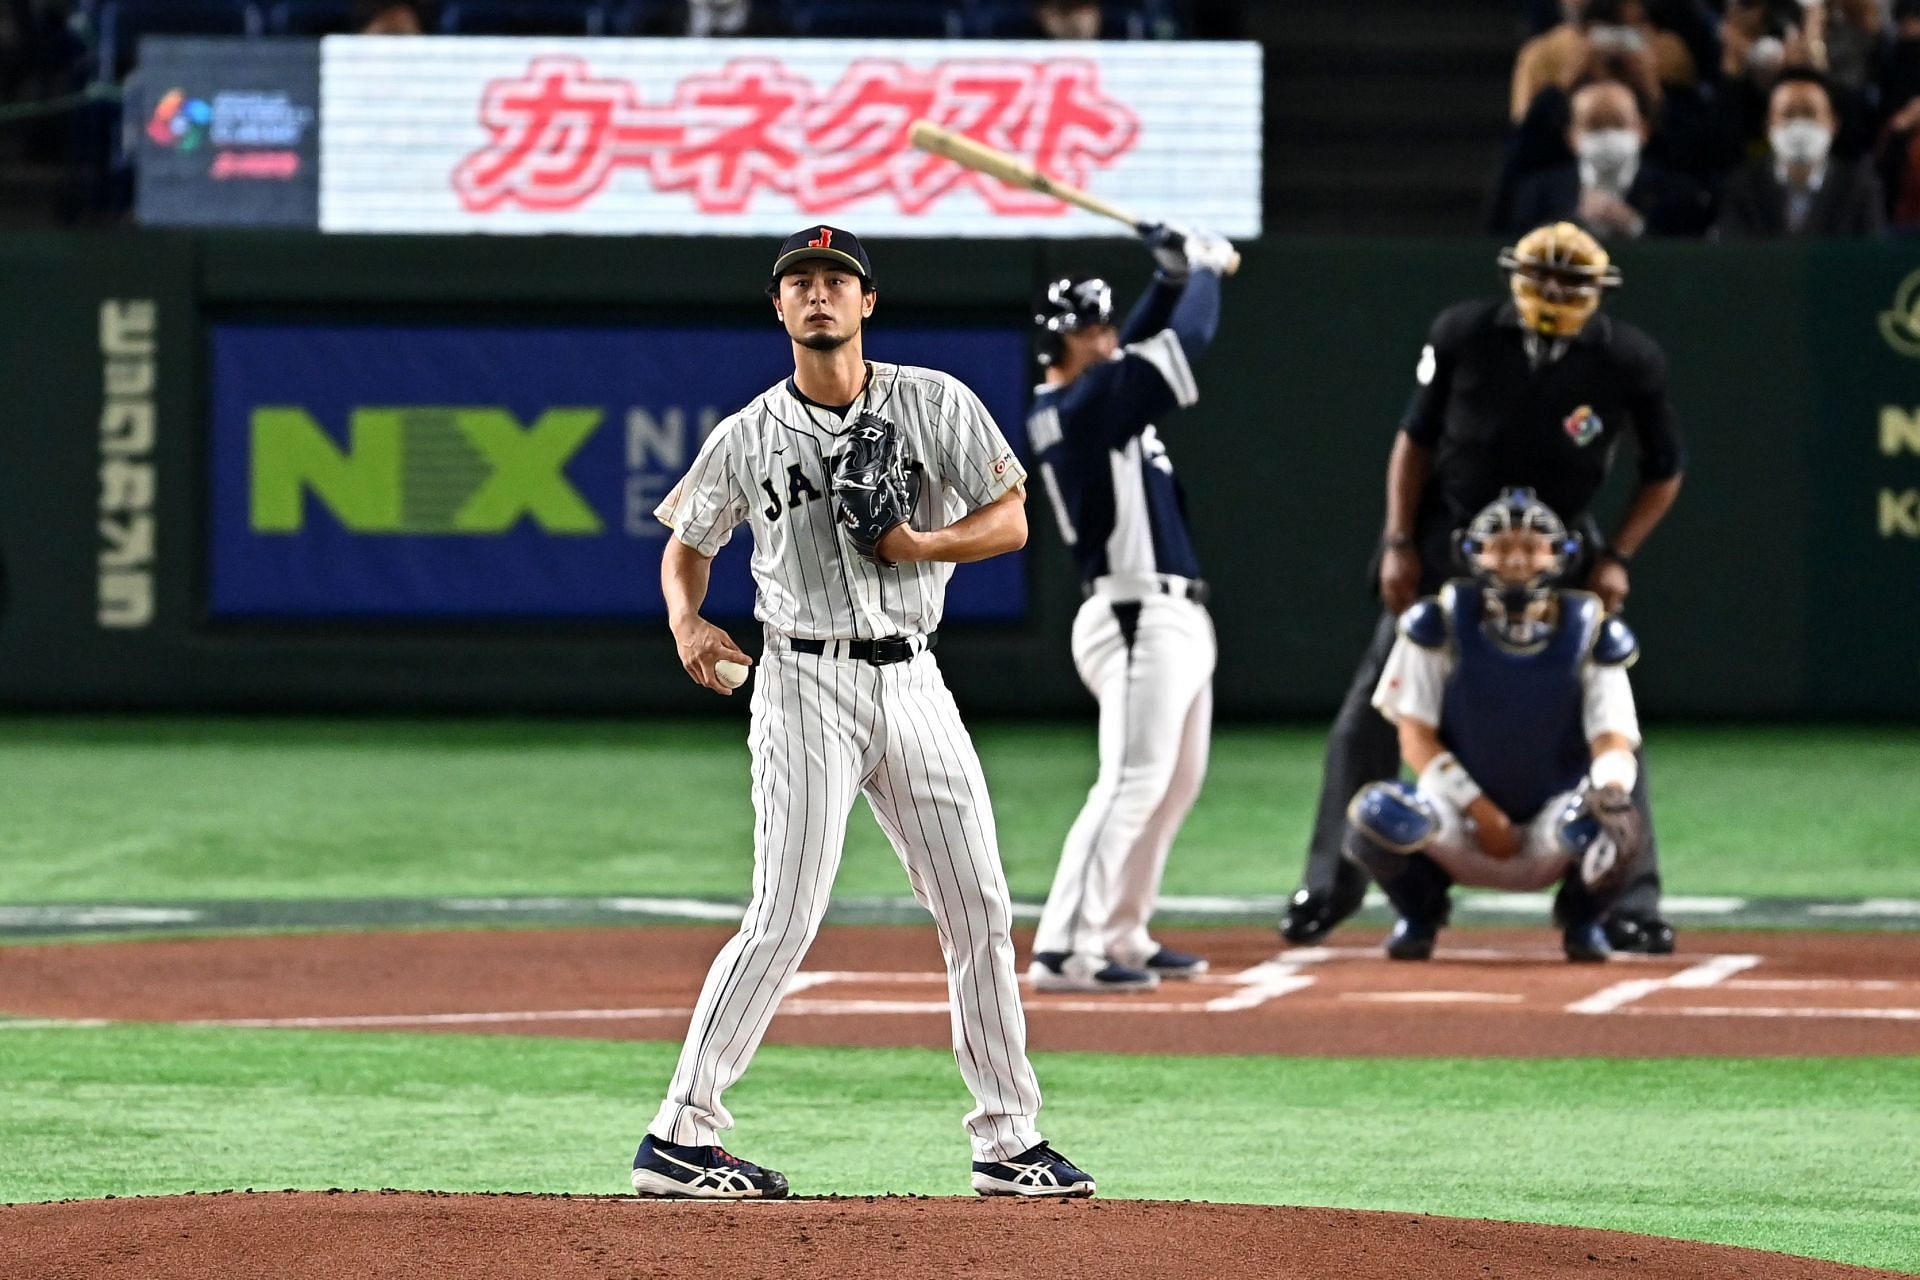 Bob Melvin With Nothing But Praise For Yu Darvish After WBC Championship -  Sports Illustrated Inside The Padres News, Analysis and More